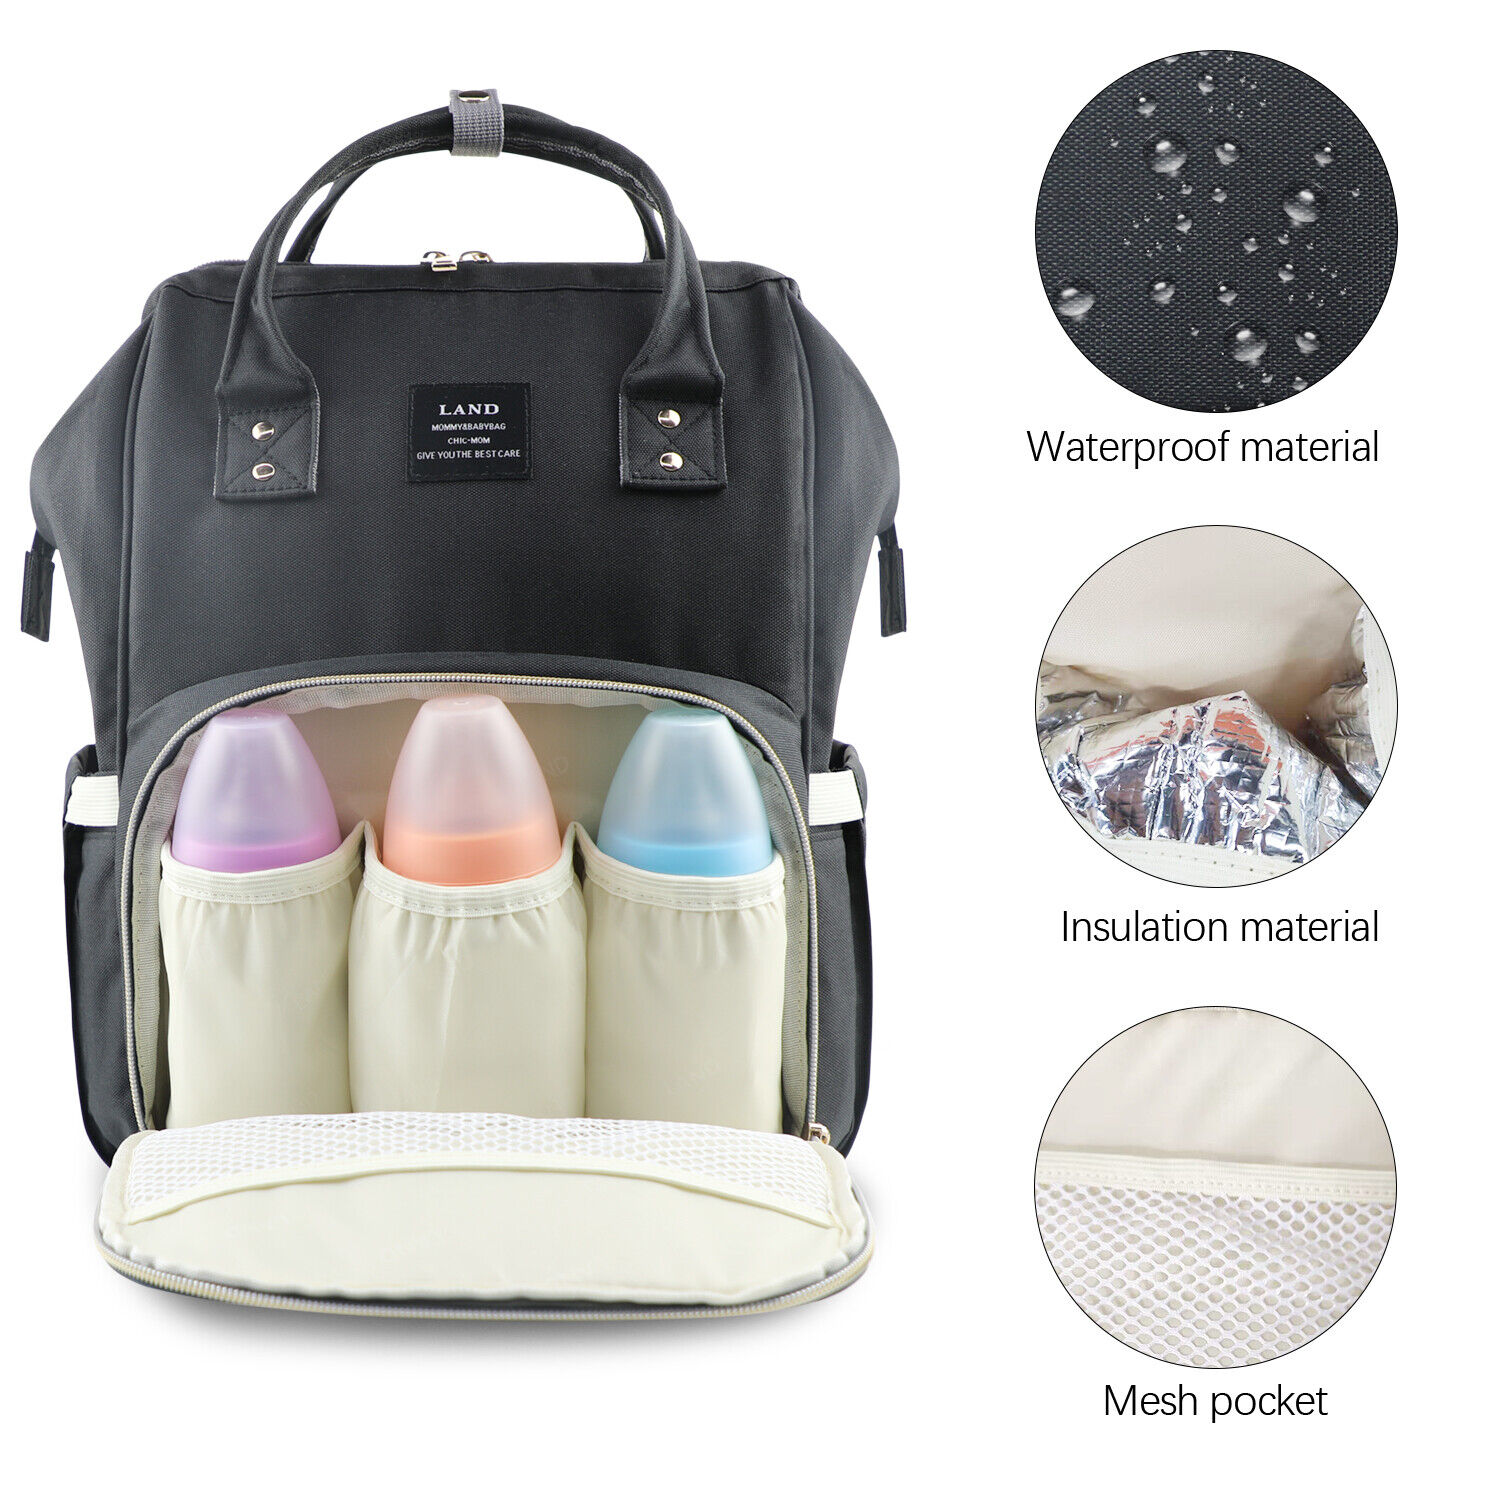 LAND LEQUEEN Baby Diaper Bag Mummy Maternity Nappy Large Changing Backpack LAND Does Not Apply - фотография #9